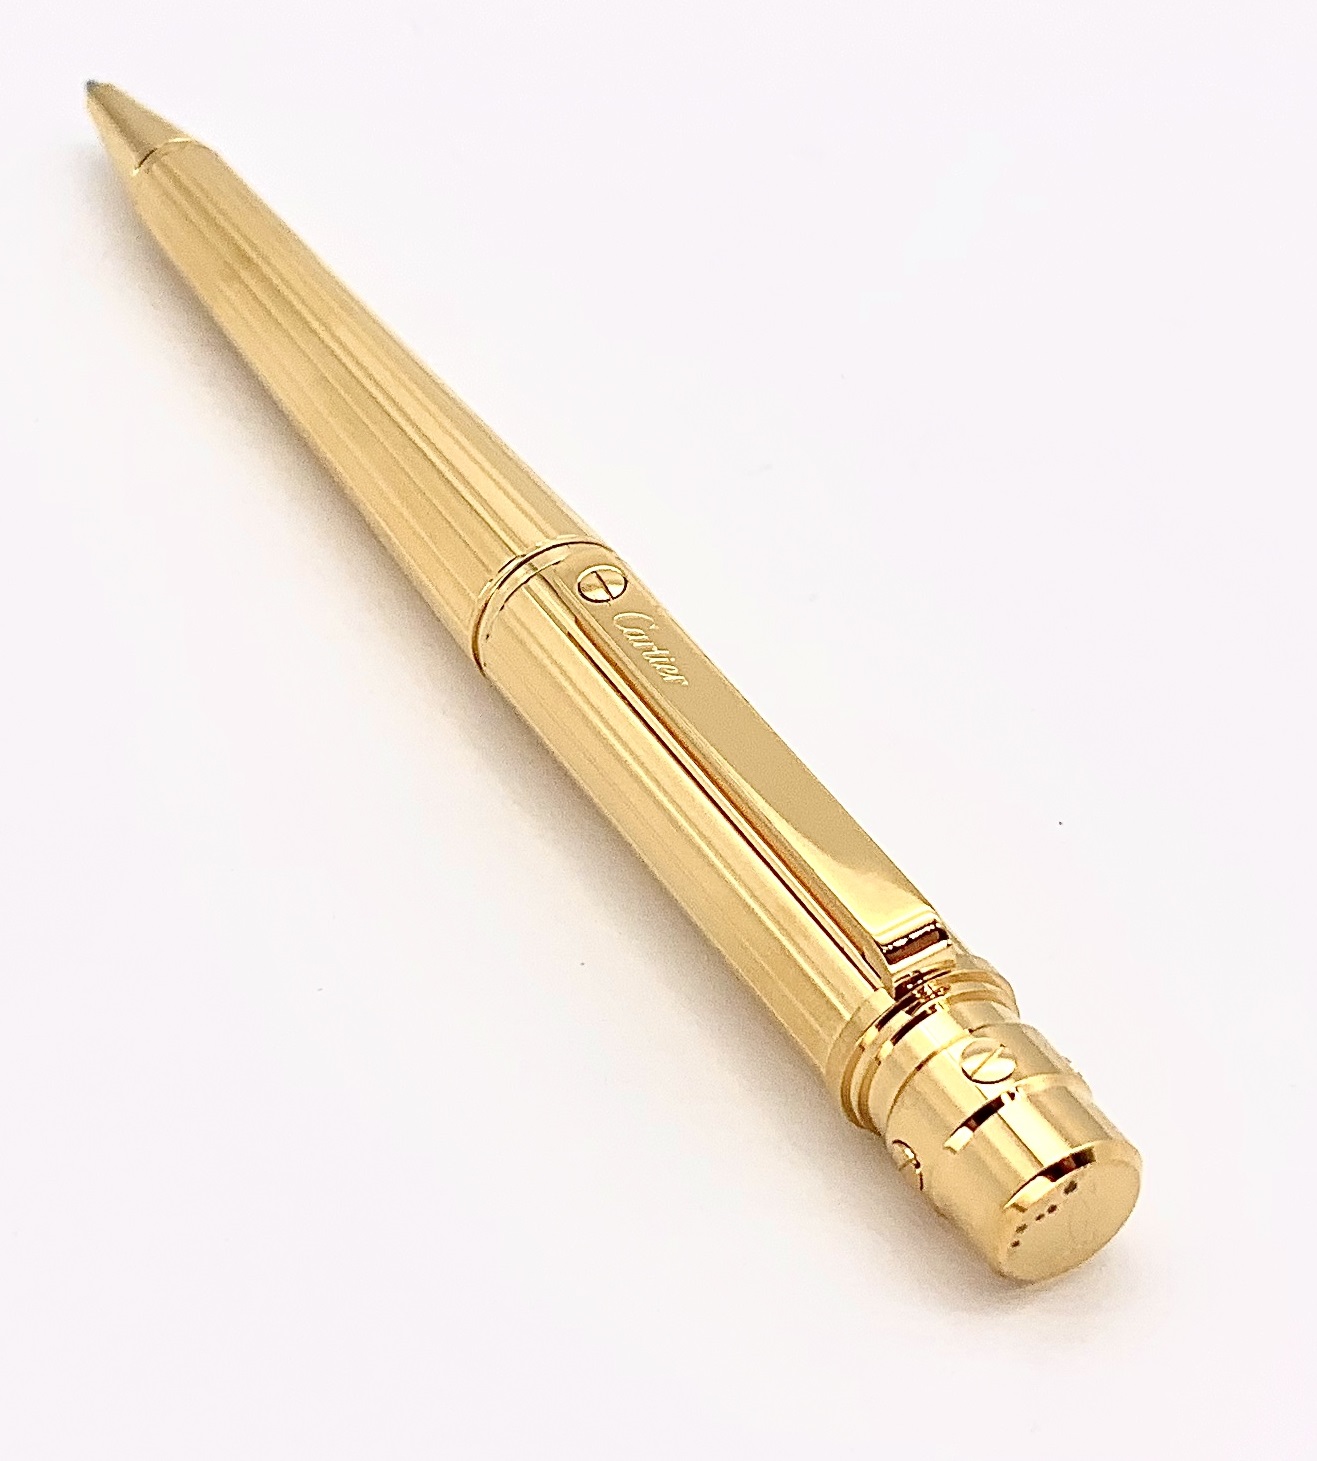 Lot - CARTIER GOLD-PLATED BALLPOINT PEN WITH OTHER GOLD FILLED PENS